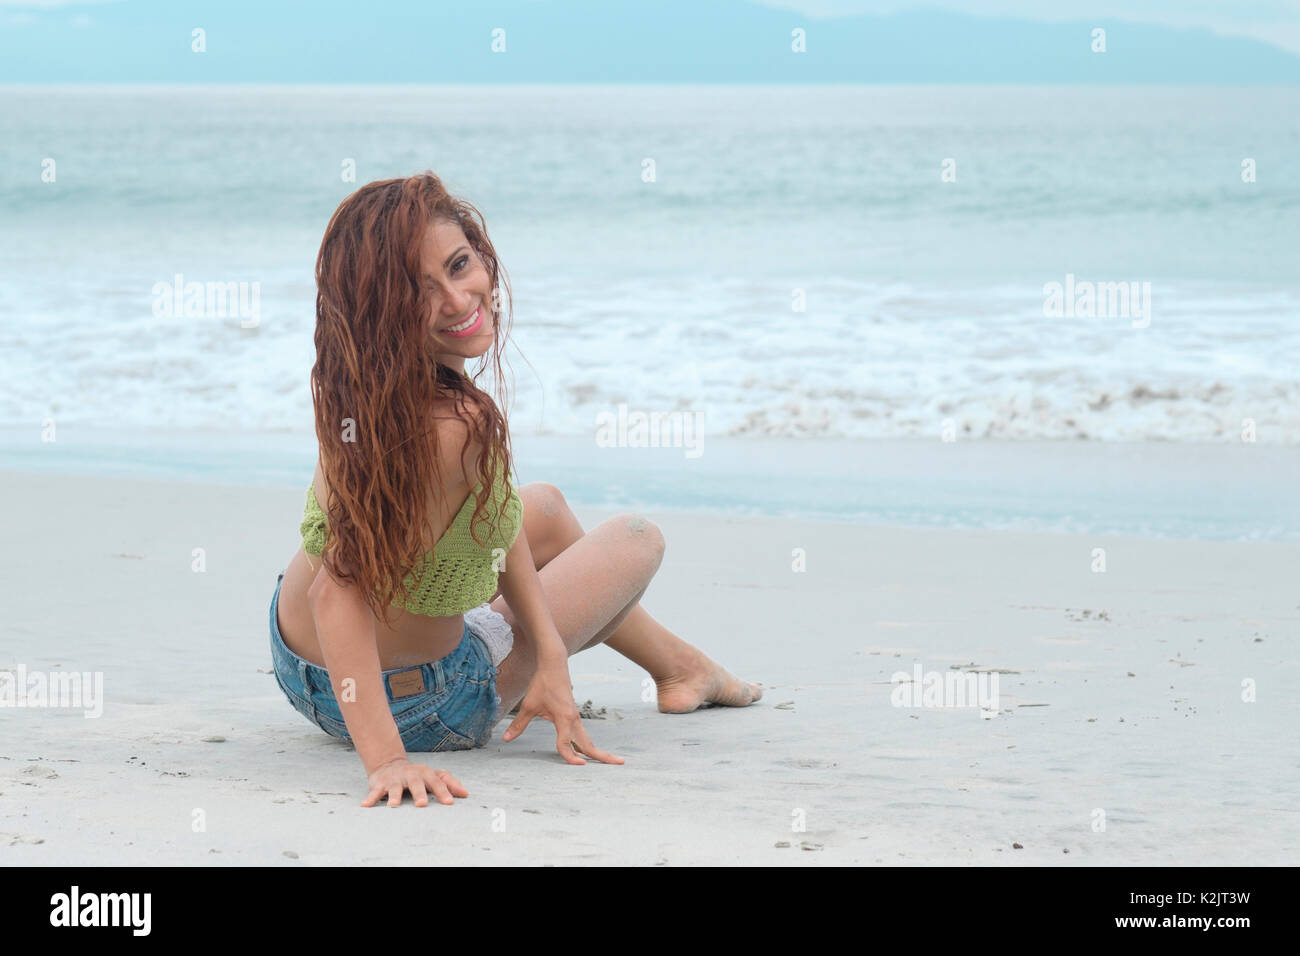 Barefoot woman sitting in sand at beach smiling while turning her body back Stock Photo